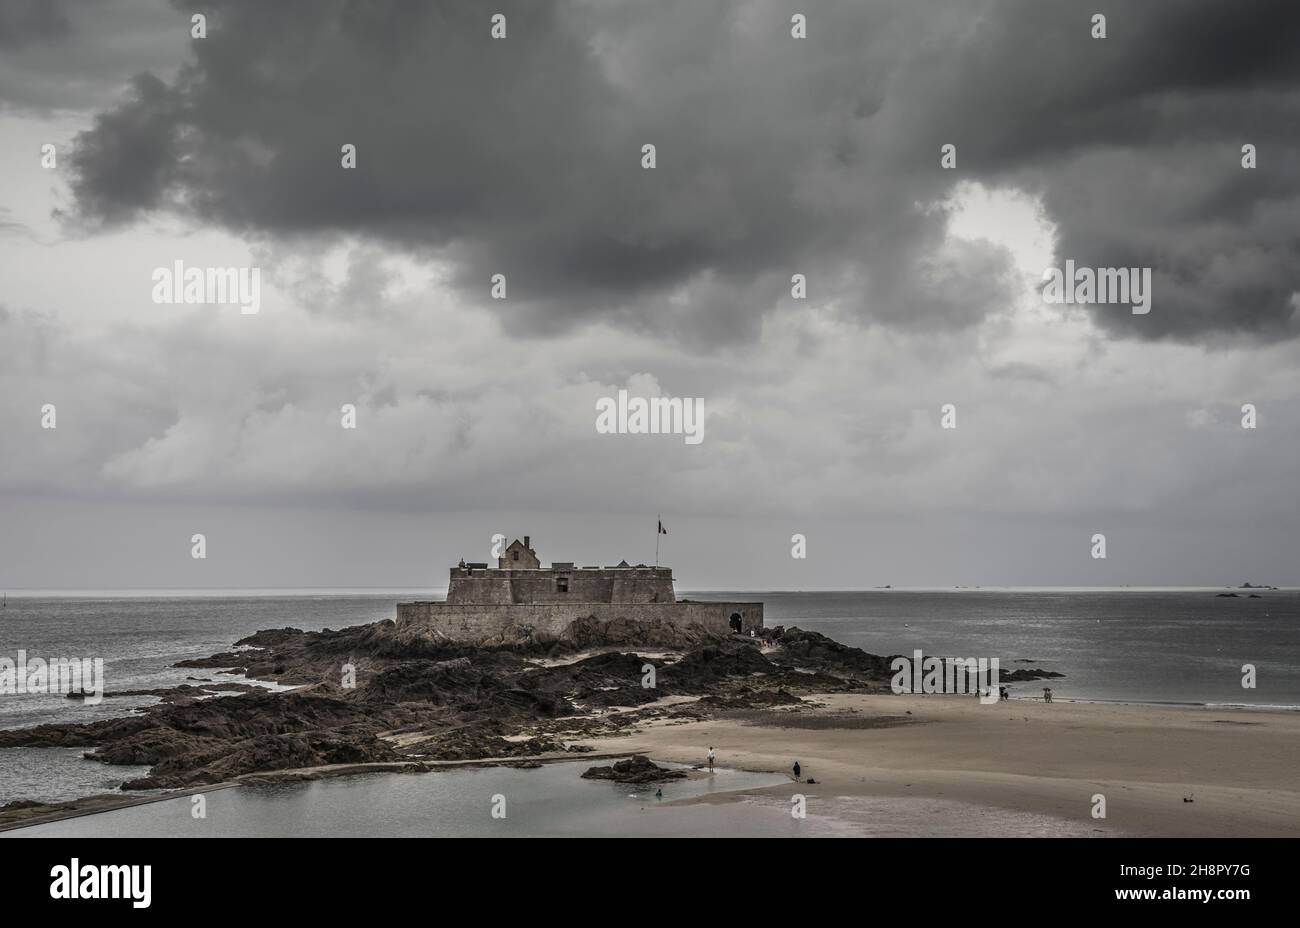 Storm clouds over the sea seen fron Saint Malo. Stock Photo